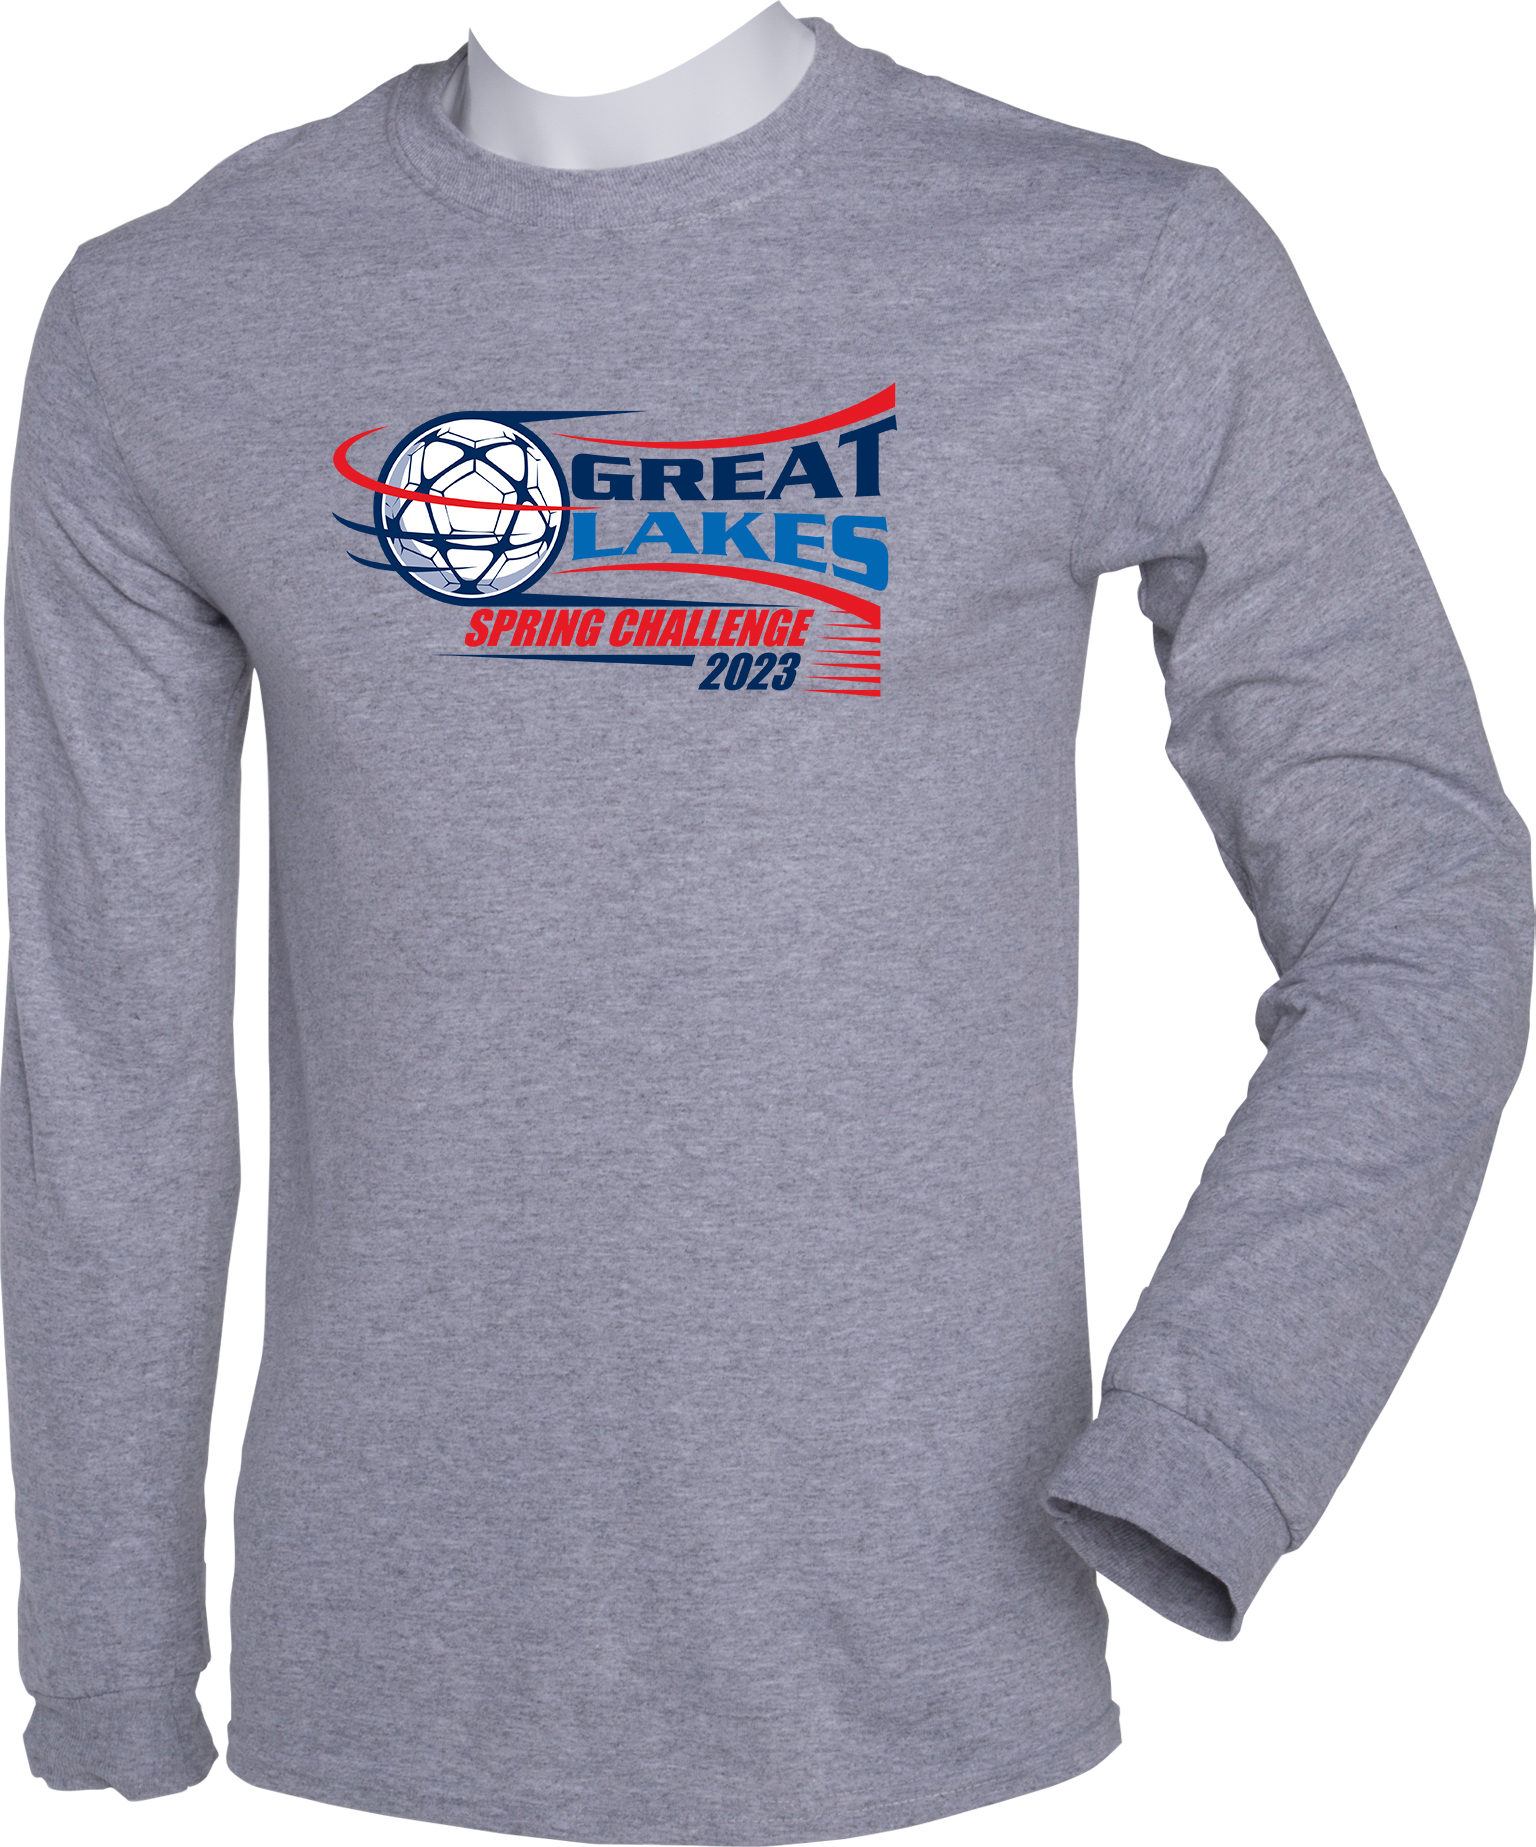 LONG SLEEVES - 2023 Great Lakes Spring Challenge